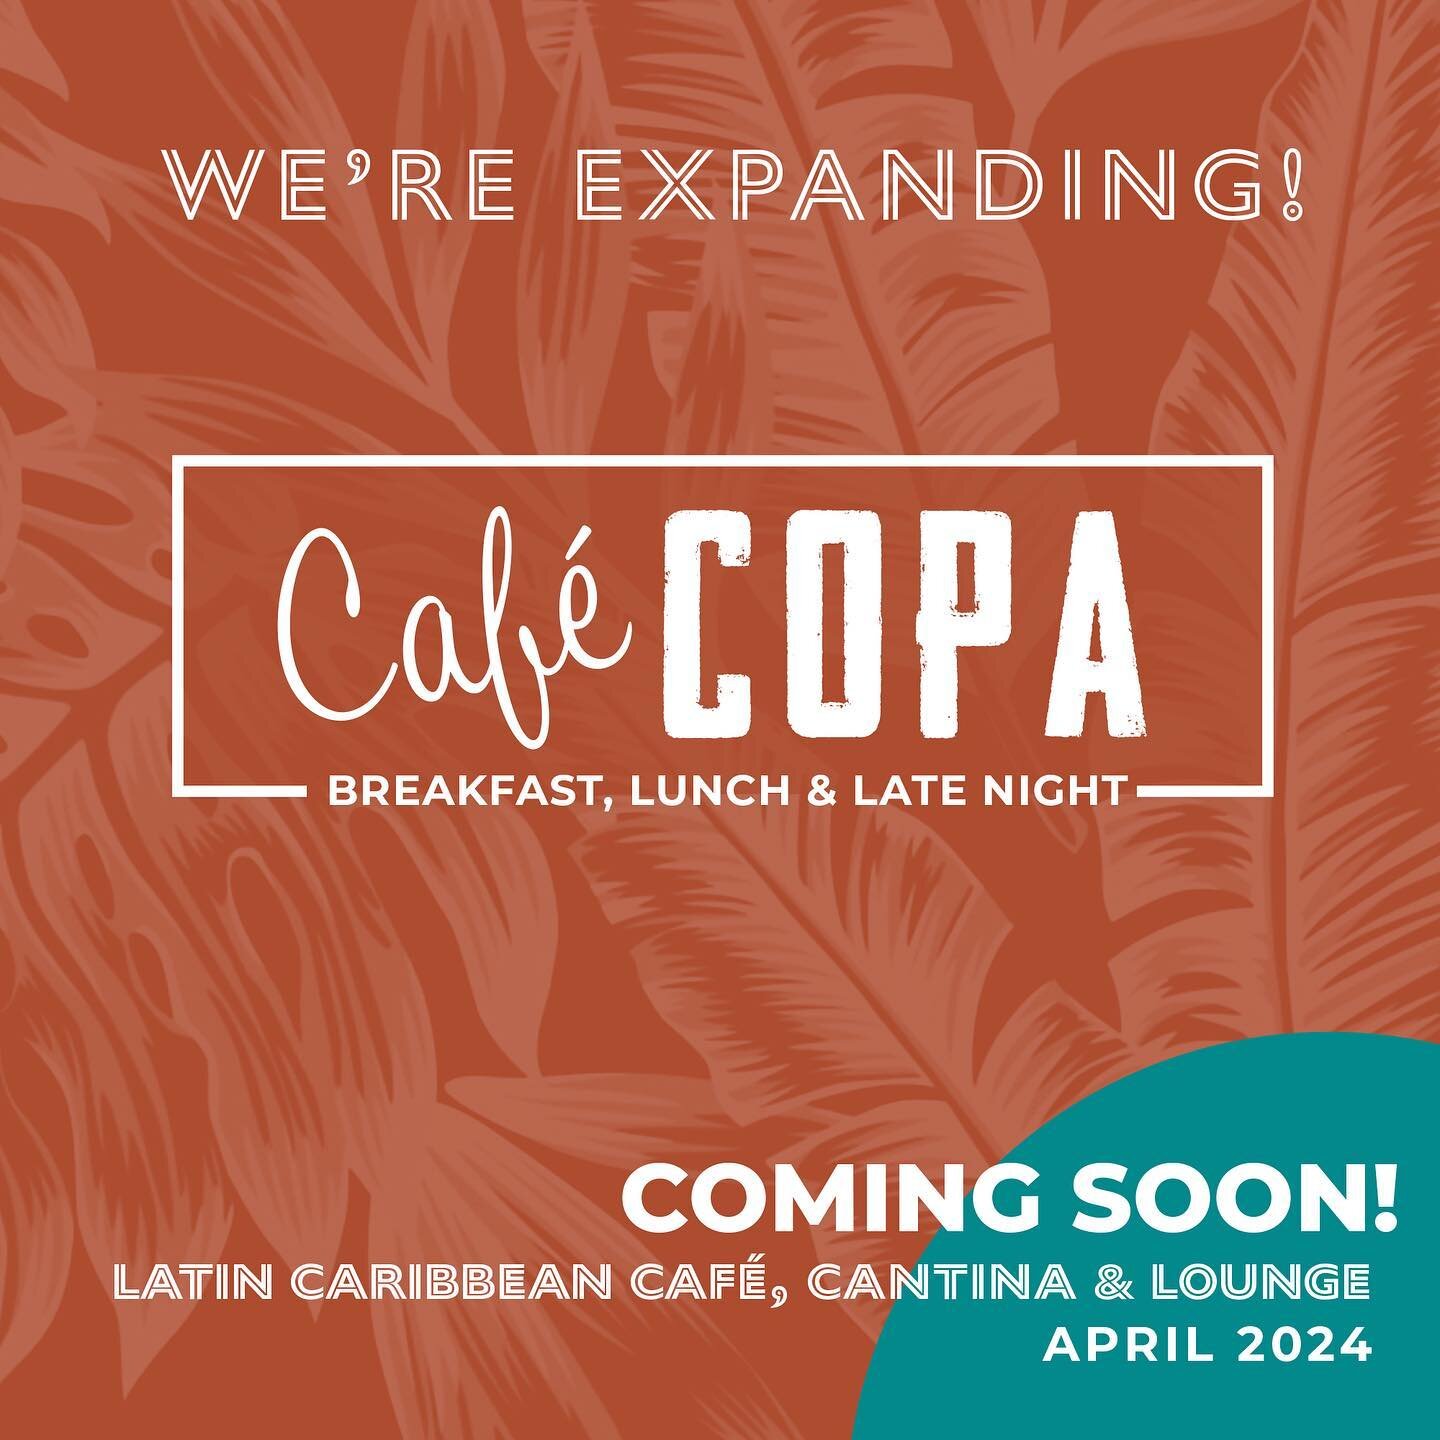 If we&rsquo;ve been quiet it&rsquo;s because we&rsquo;ve been busy!!!

Excited to announce the expansion of our space and concept! 

CAF&Eacute; COPA is set to open soon providing a curated space for Coffee, Breakfast &amp; Lunch offerings. Grab-N Go